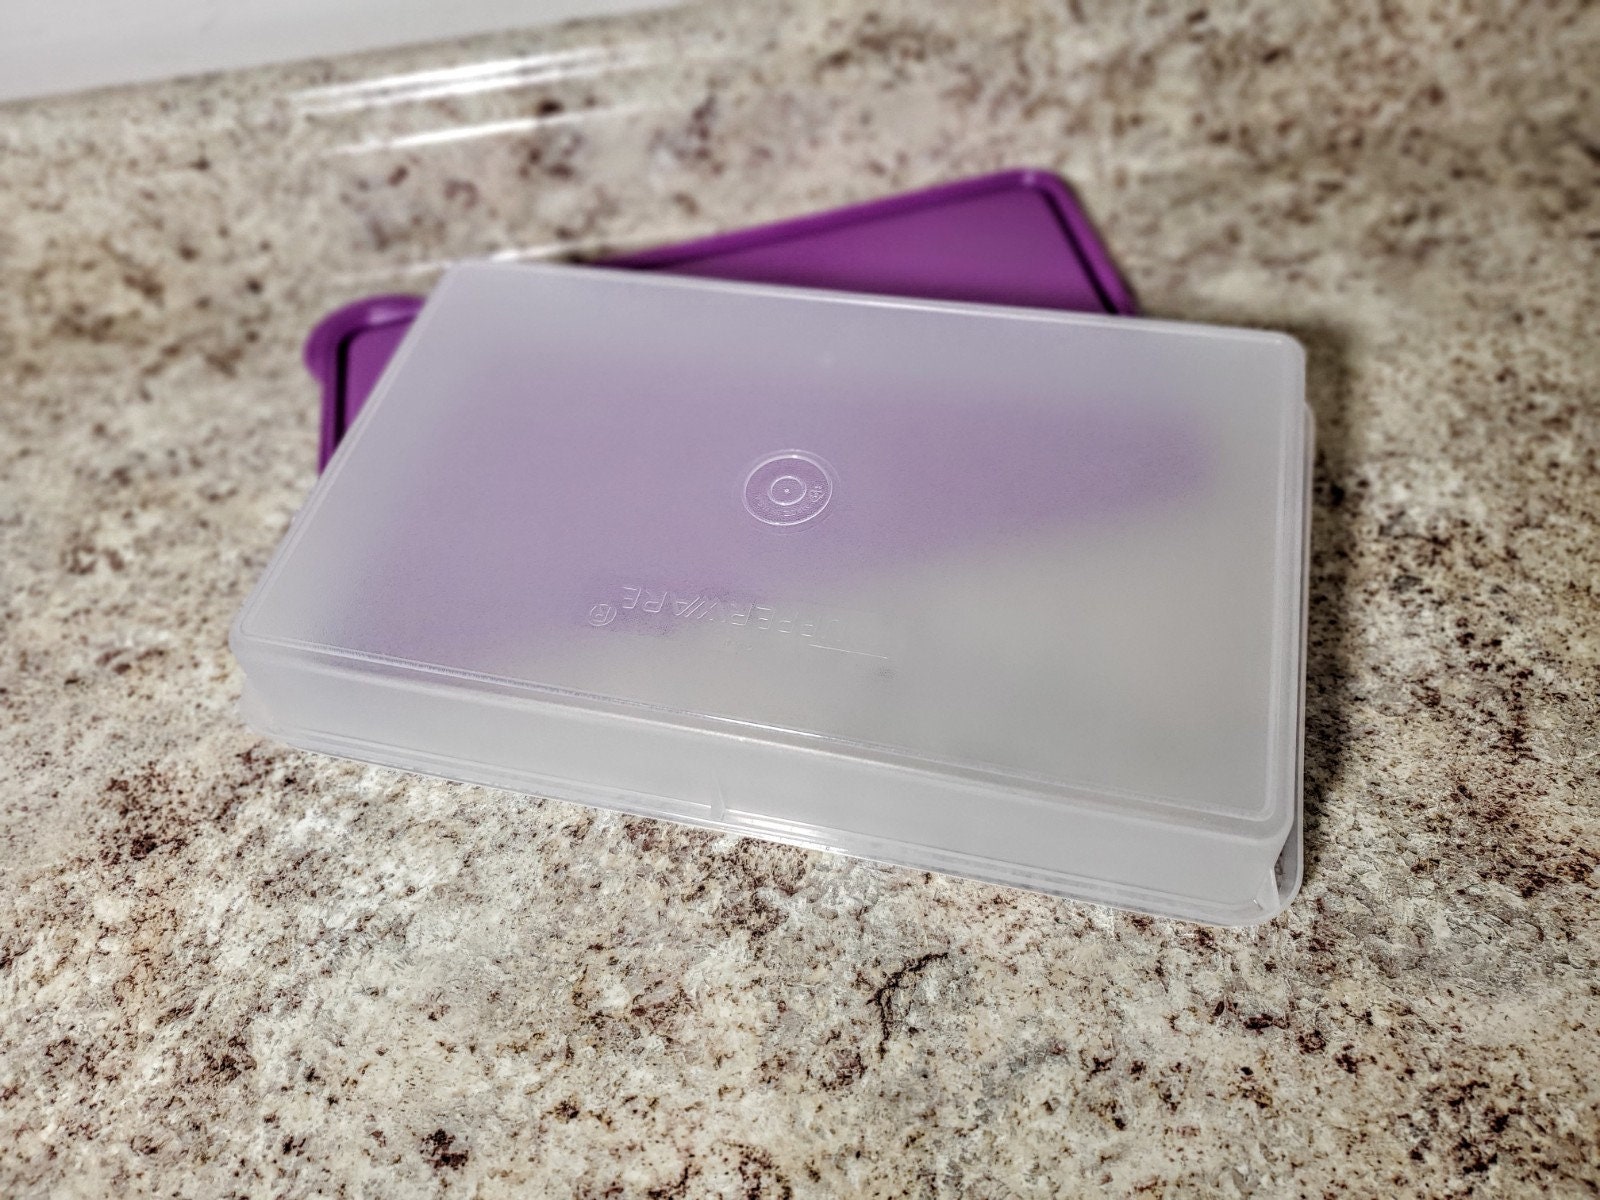  NewTupperware Large Cold Cut Keeper Snack N Stor Container  Lilac Seal (1): Home & Kitchen